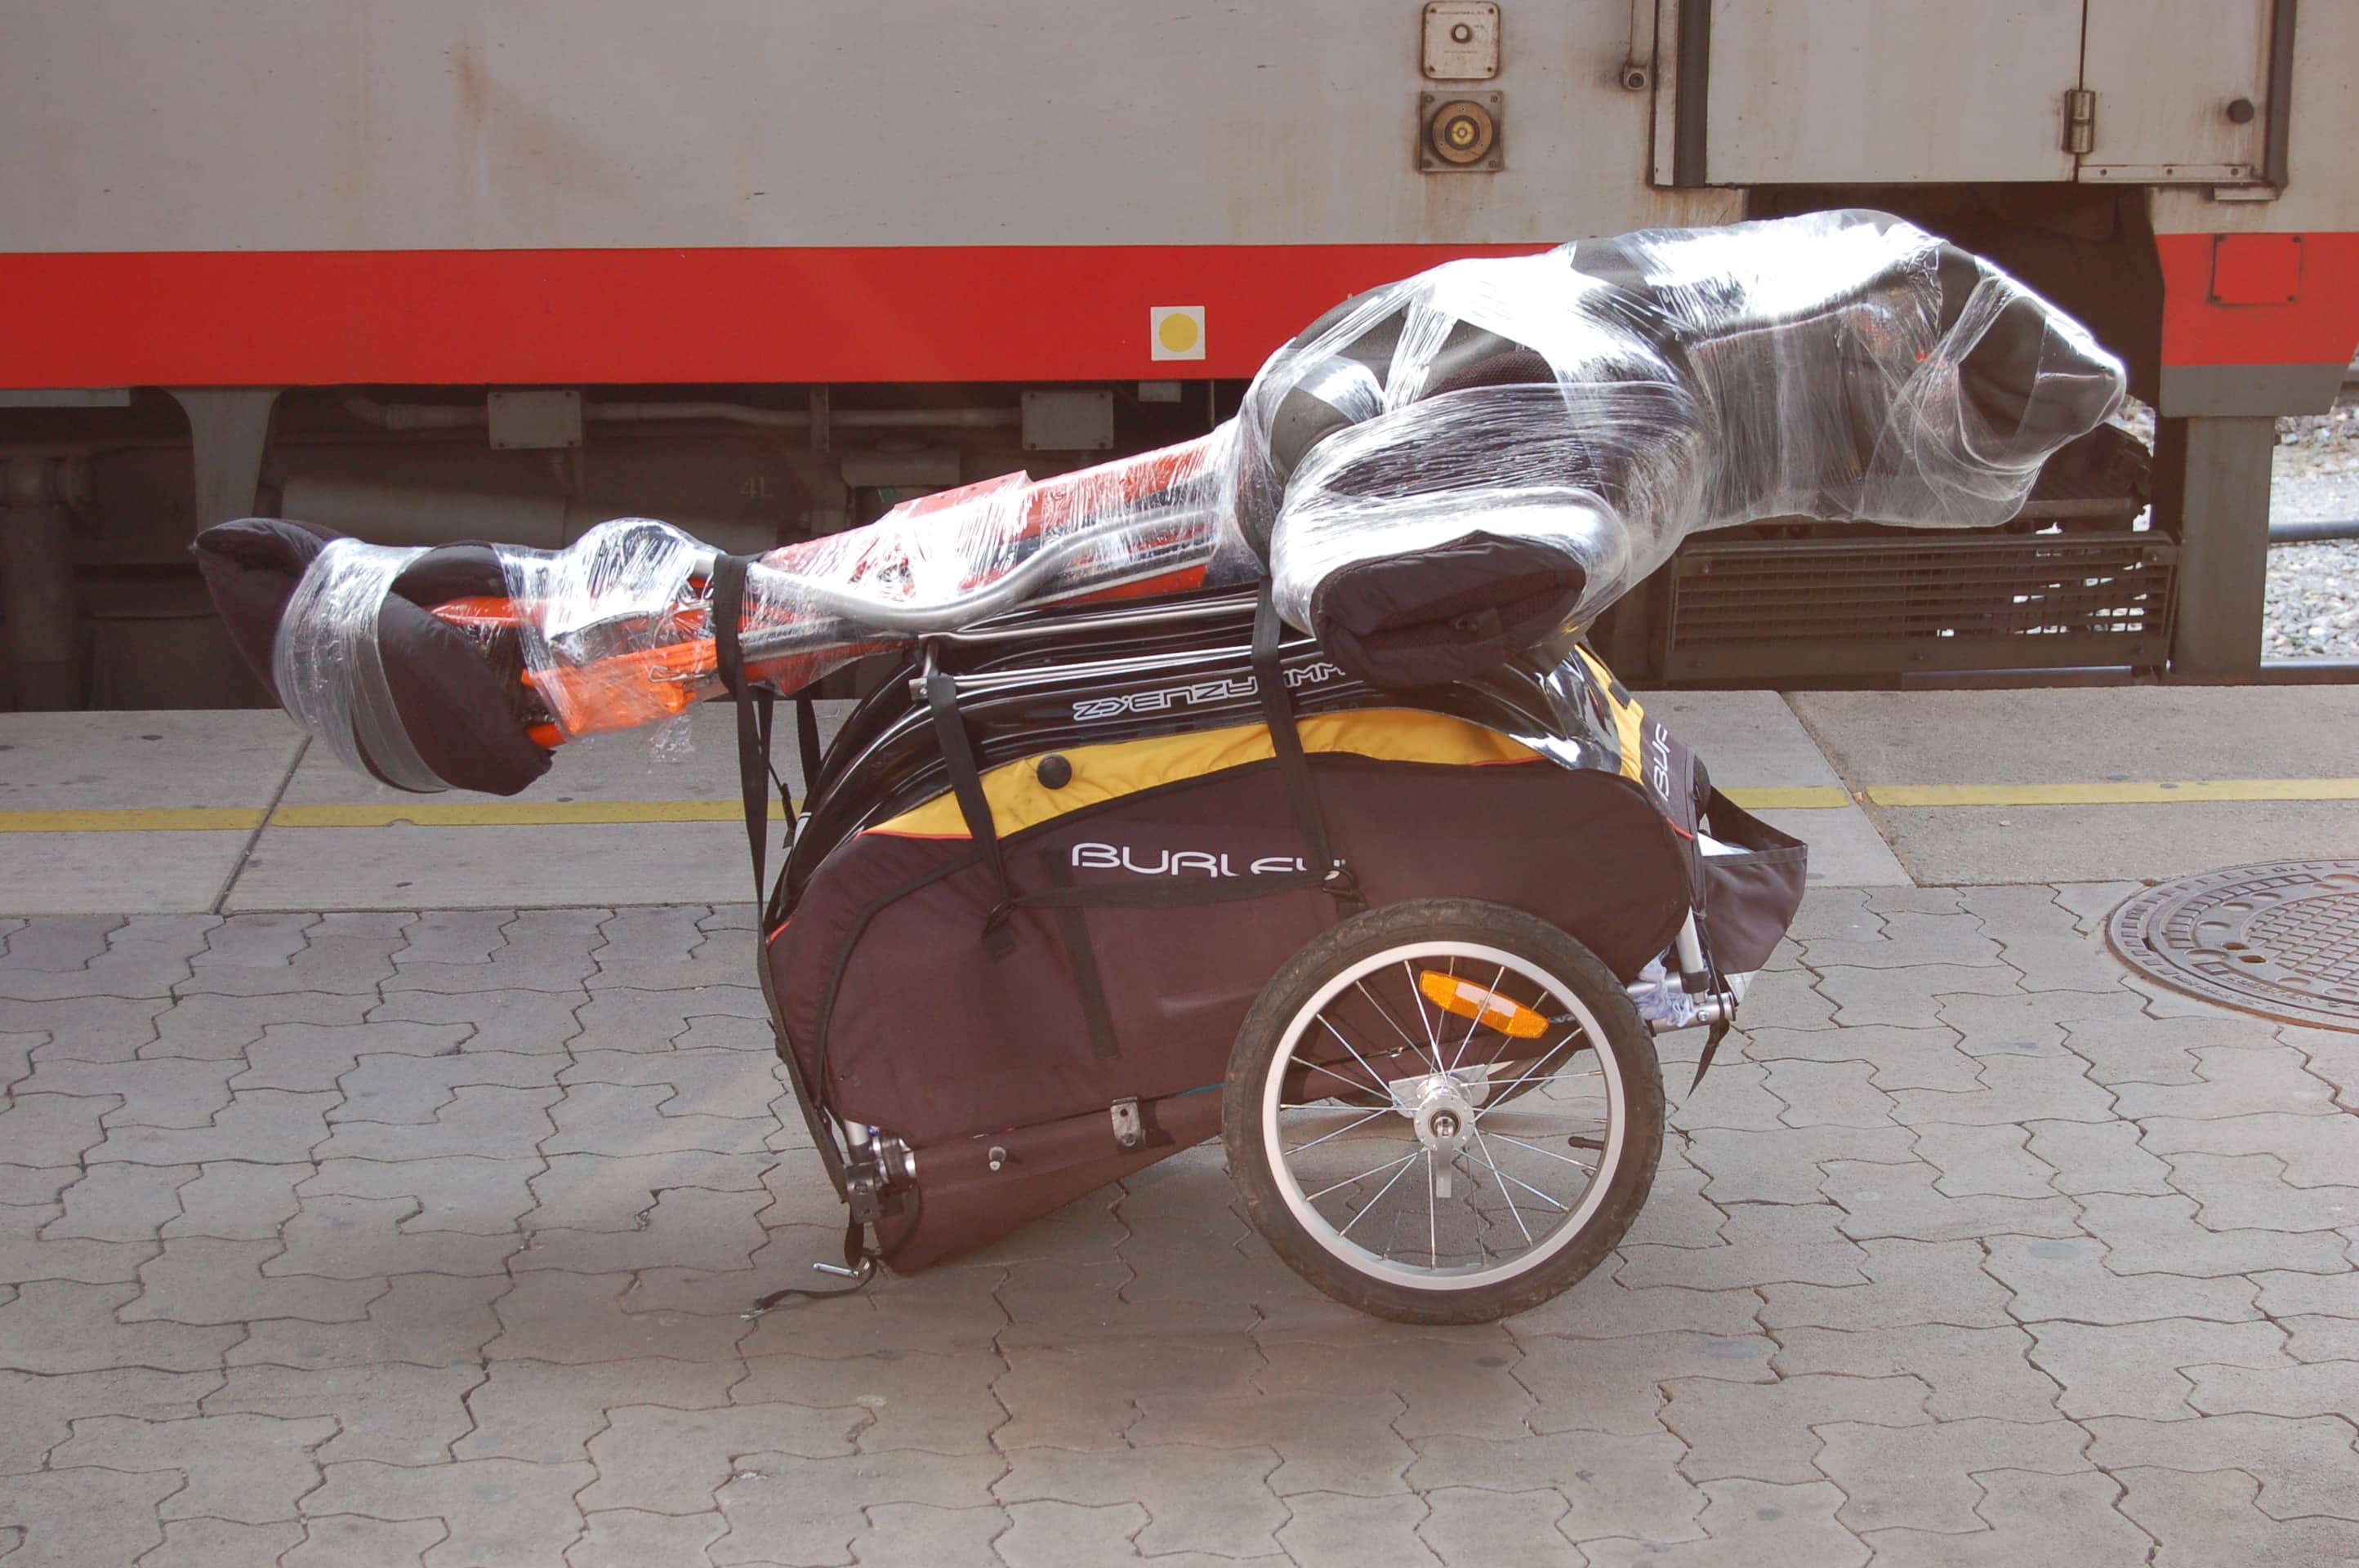 Luggage & Transport: Your Recumbent as a Pack Mule - HP Velotechnik